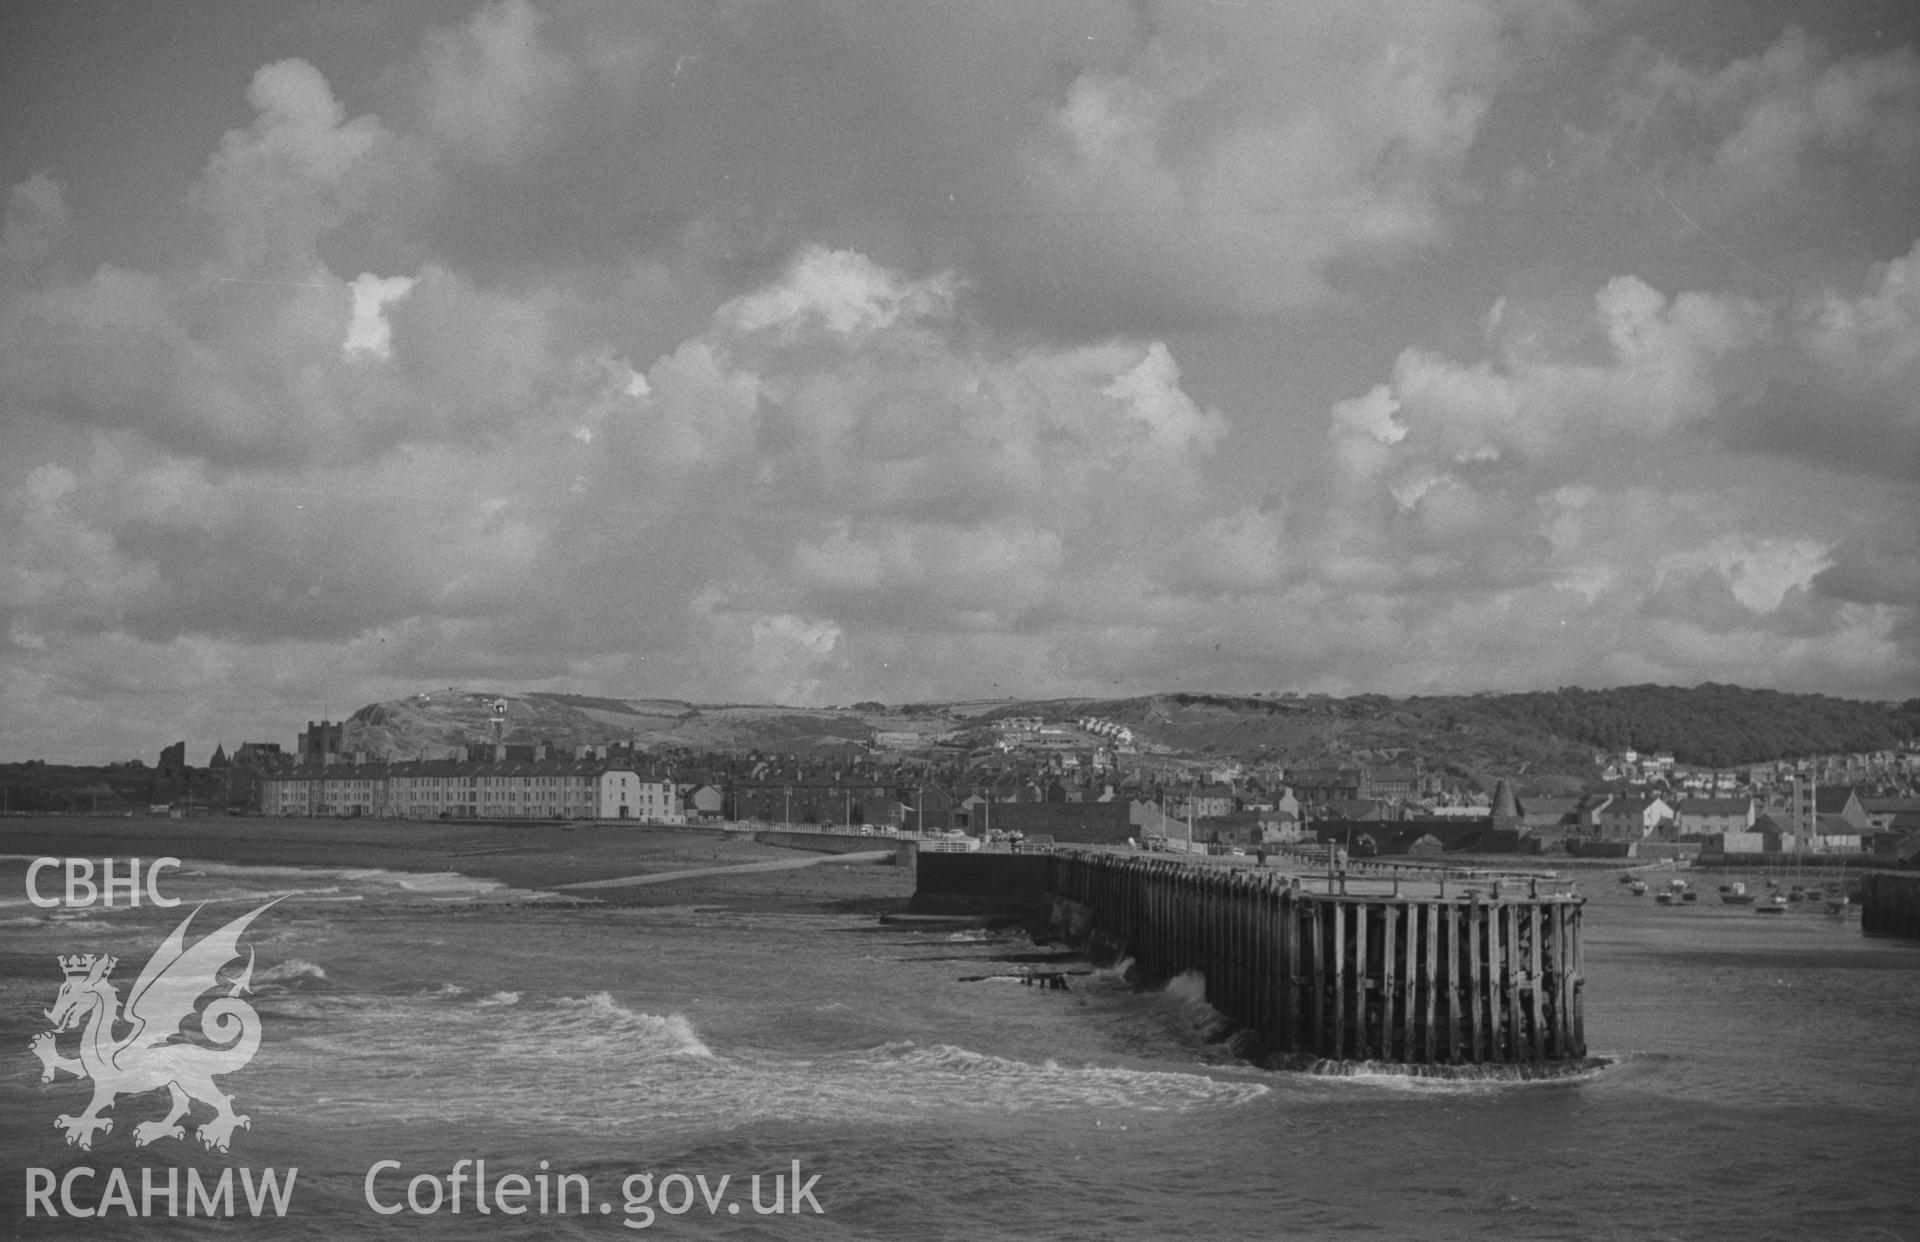 Digital copy of a black and white negative showing view of Aberystwyth jetty. Photographed by Arthur O. Chater in September 1964 from Tanybwlch pier, Aberystwyth. Grid Reference SN 5785 8078. (Panorama. Photograph 3 of 10).